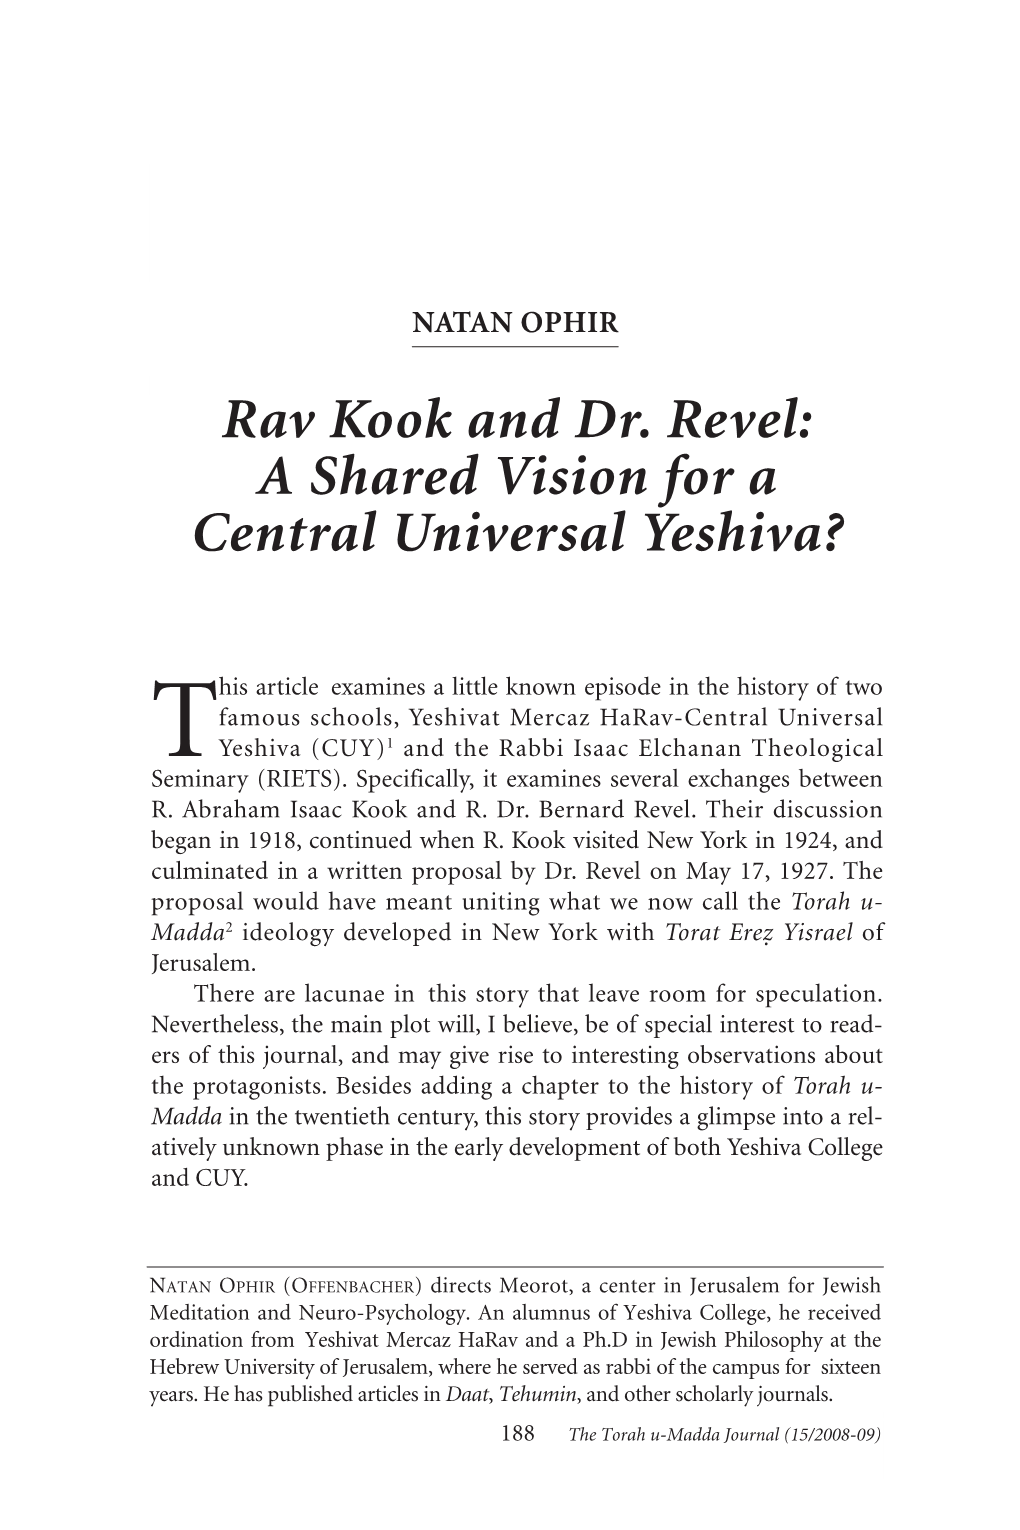 Rav Kook and Dr. Revel: a Shared Vision for a Central Universal Yeshiva?